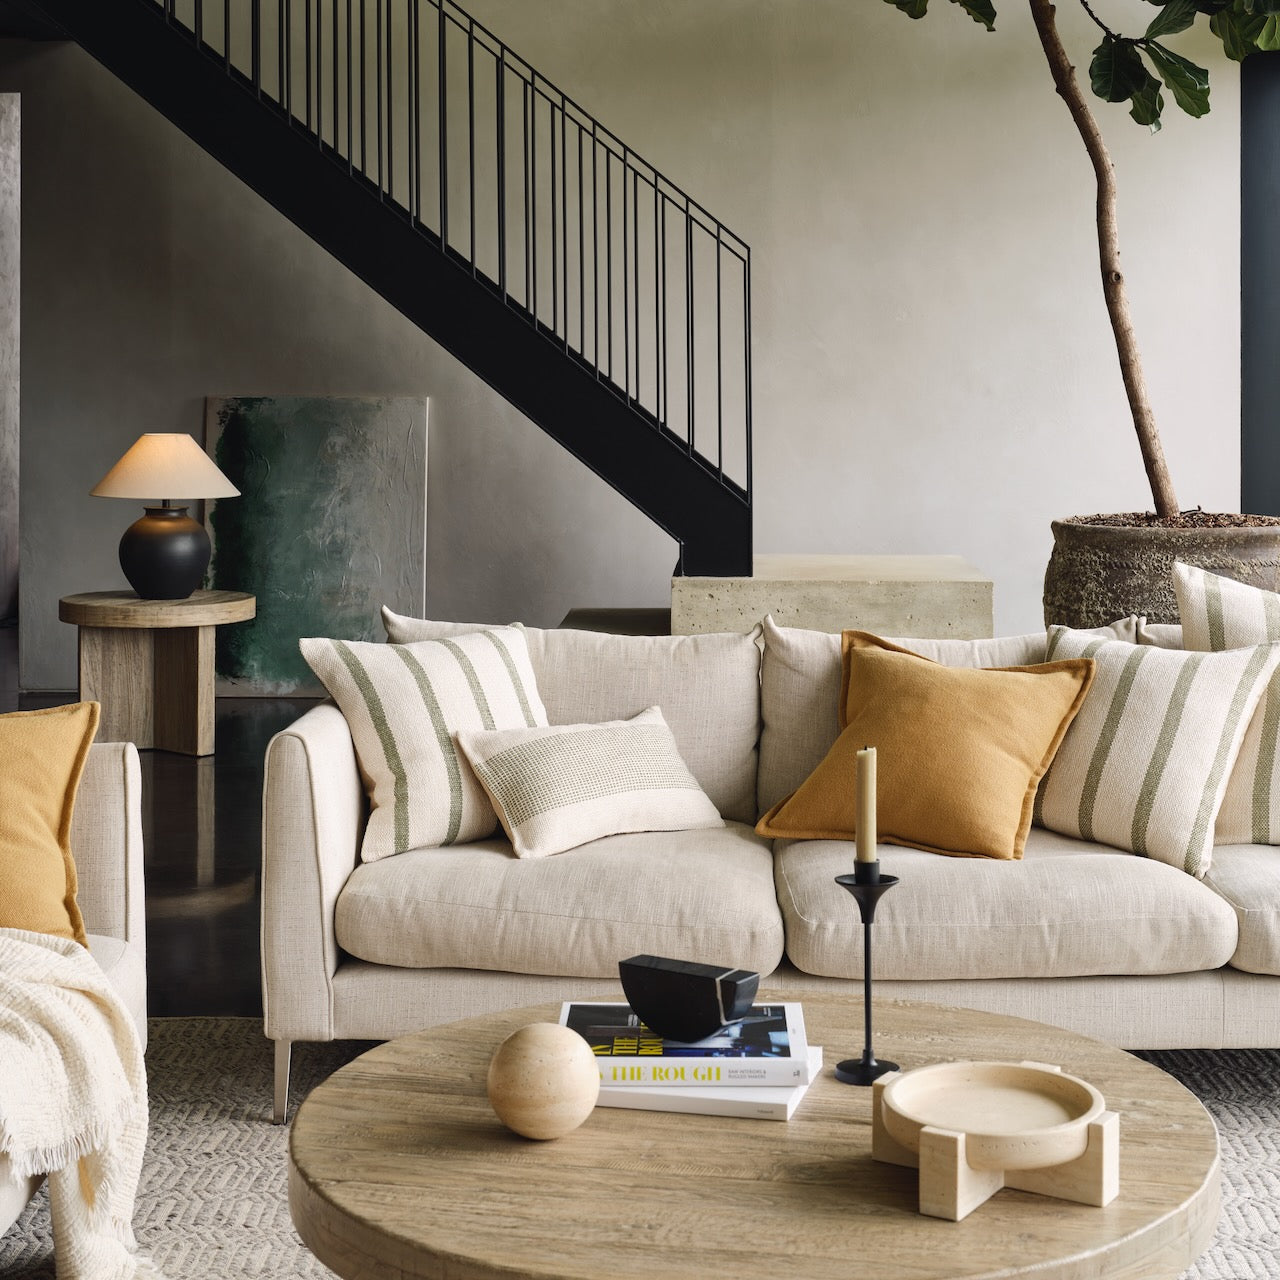 Living room styling by Layered Lounge with our collection of cushions and travertine pieces.